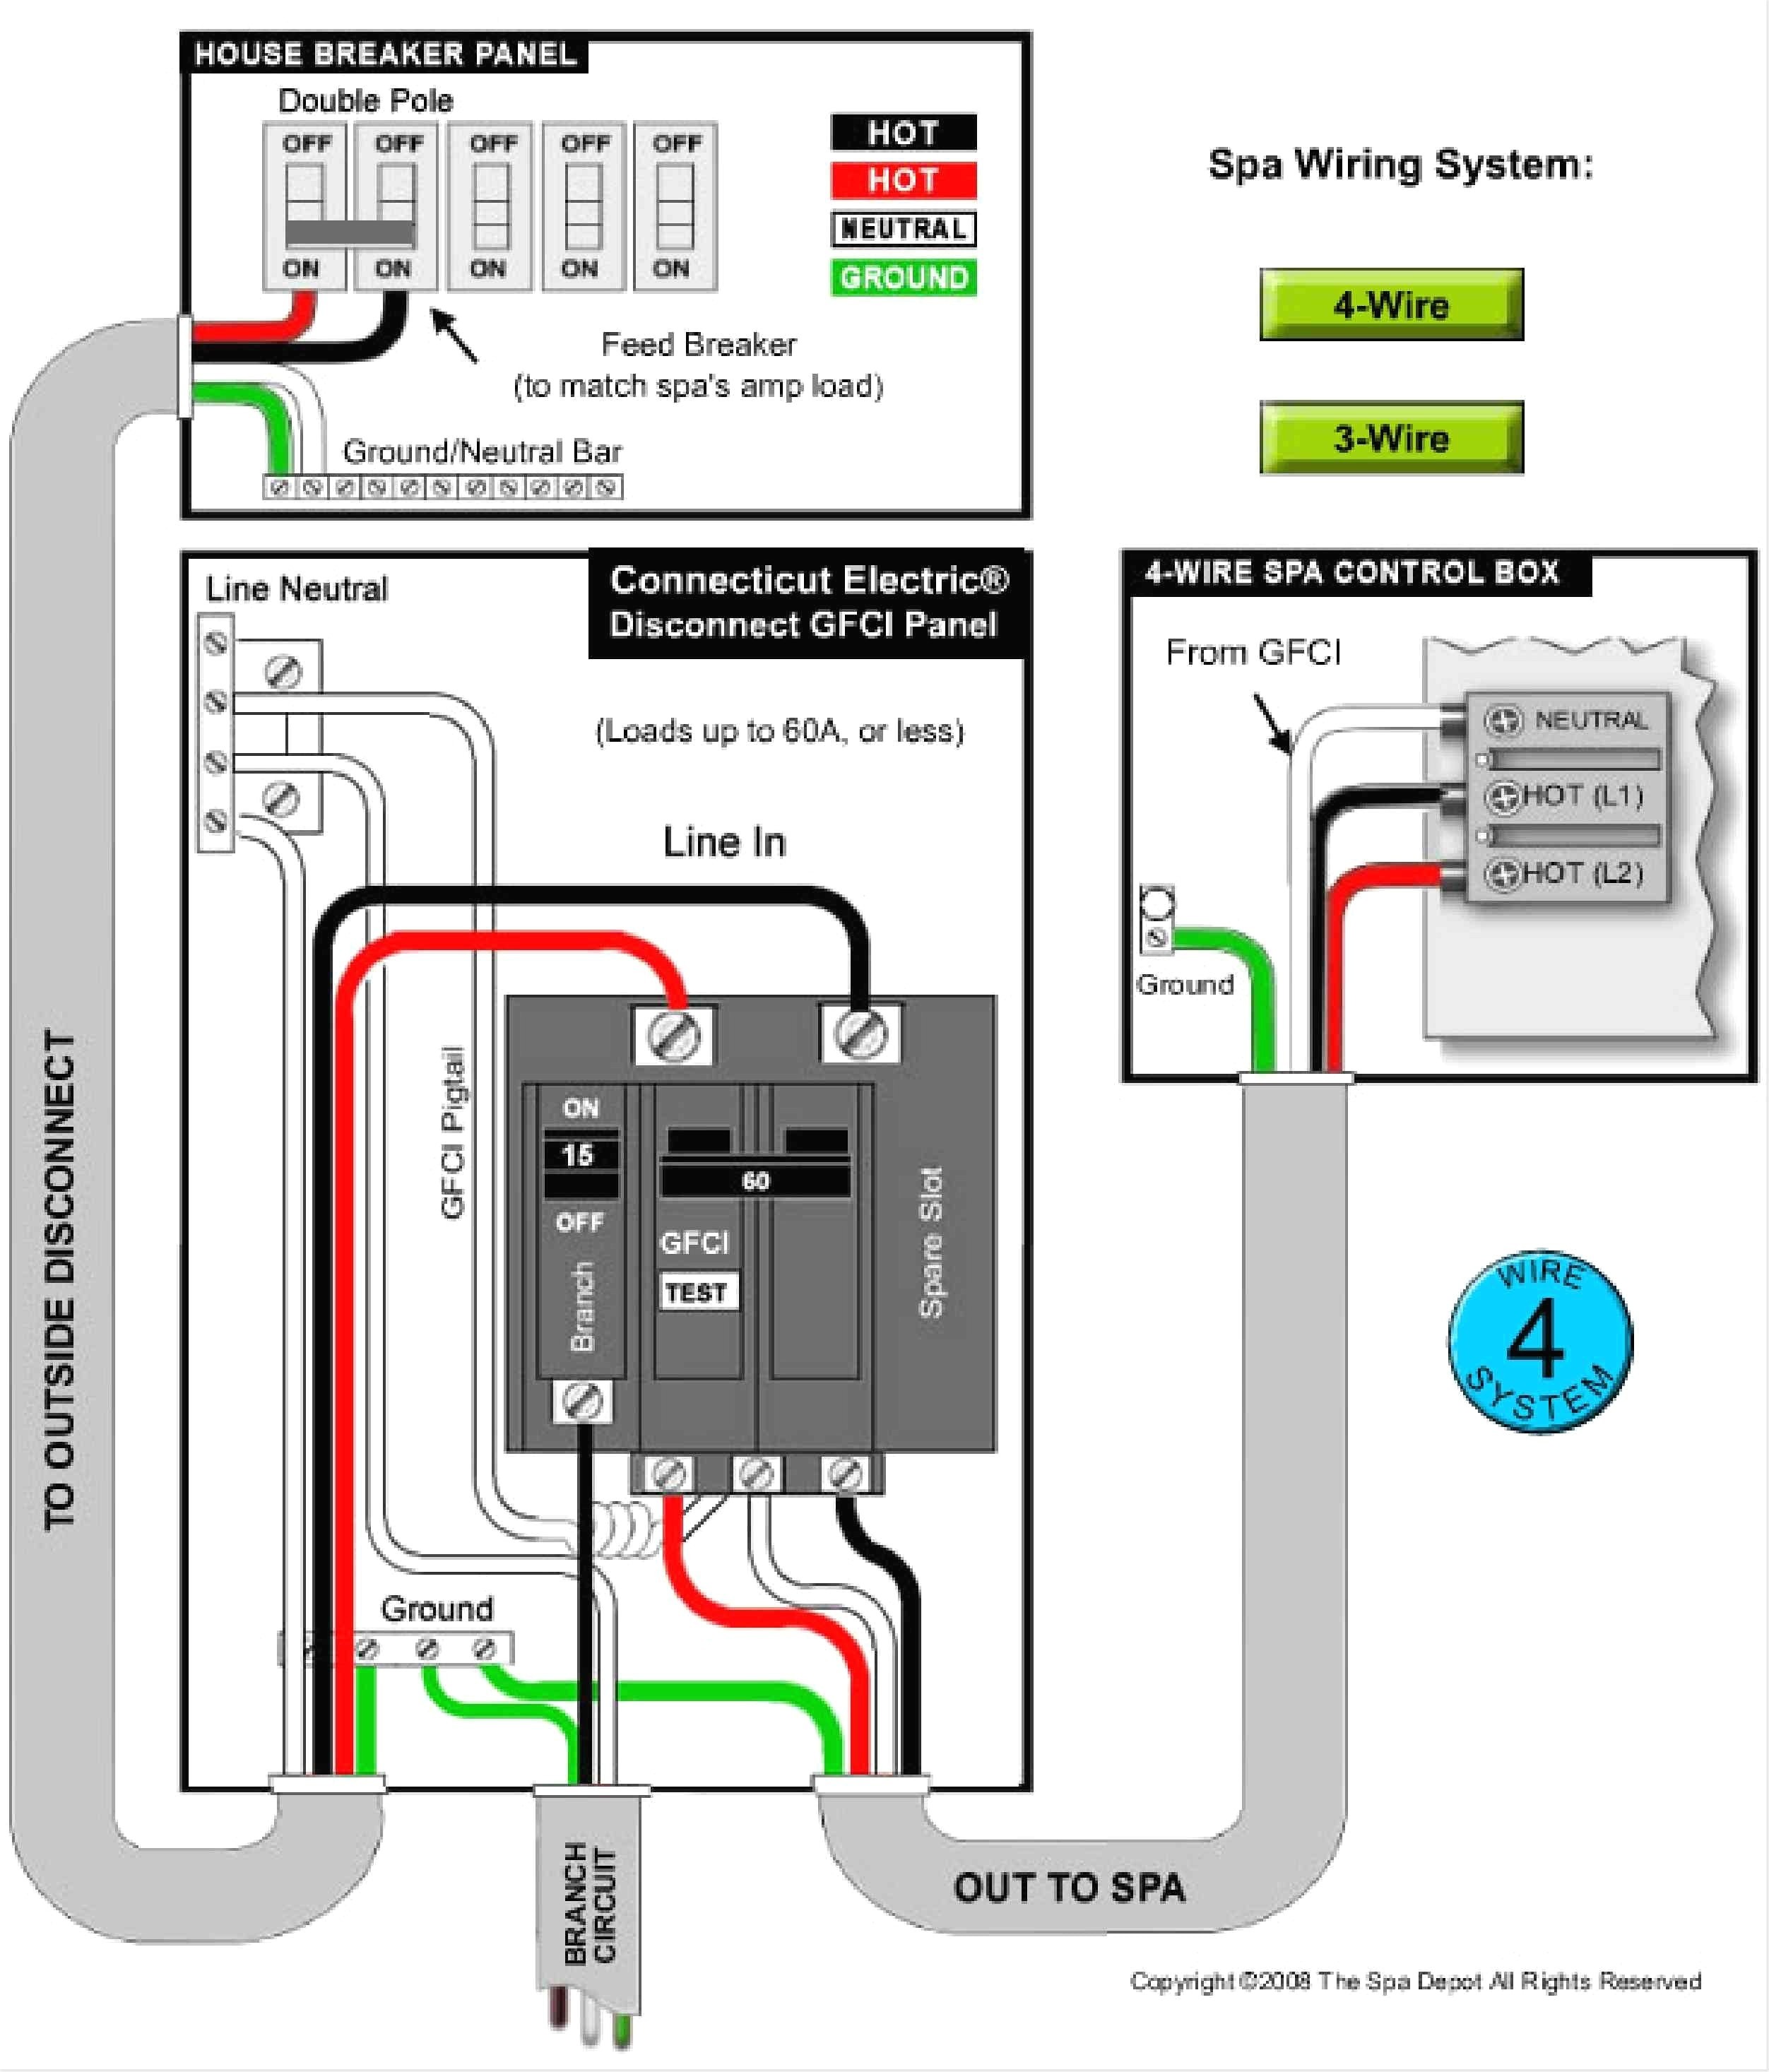 wiring diagram for multiple gfci outlets archives kobecityinfo of 4 wire 220 volt wiring diagram